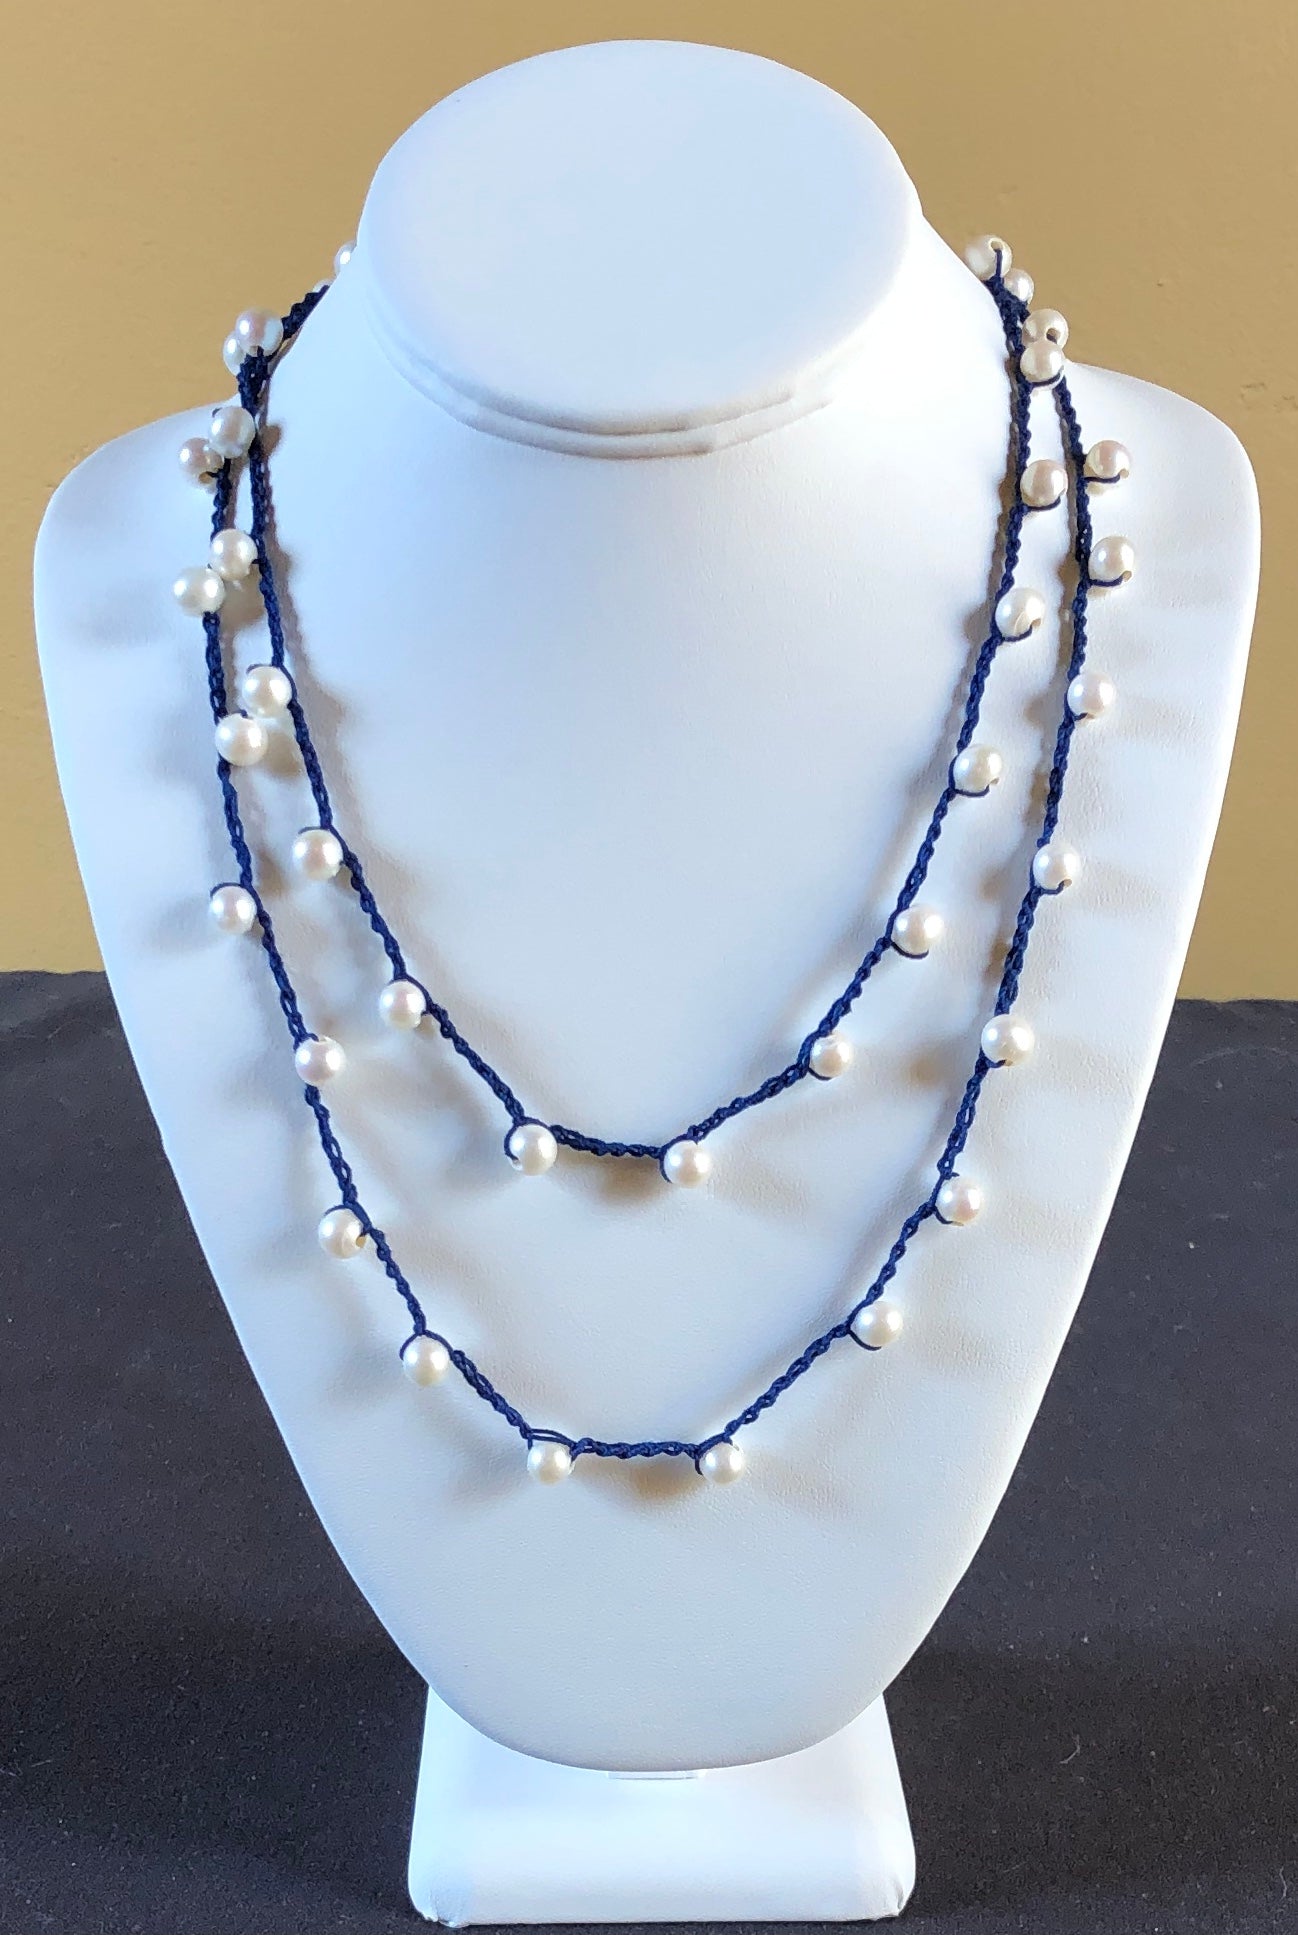 Necklace - Navy blue crocheted with freshwater pearls